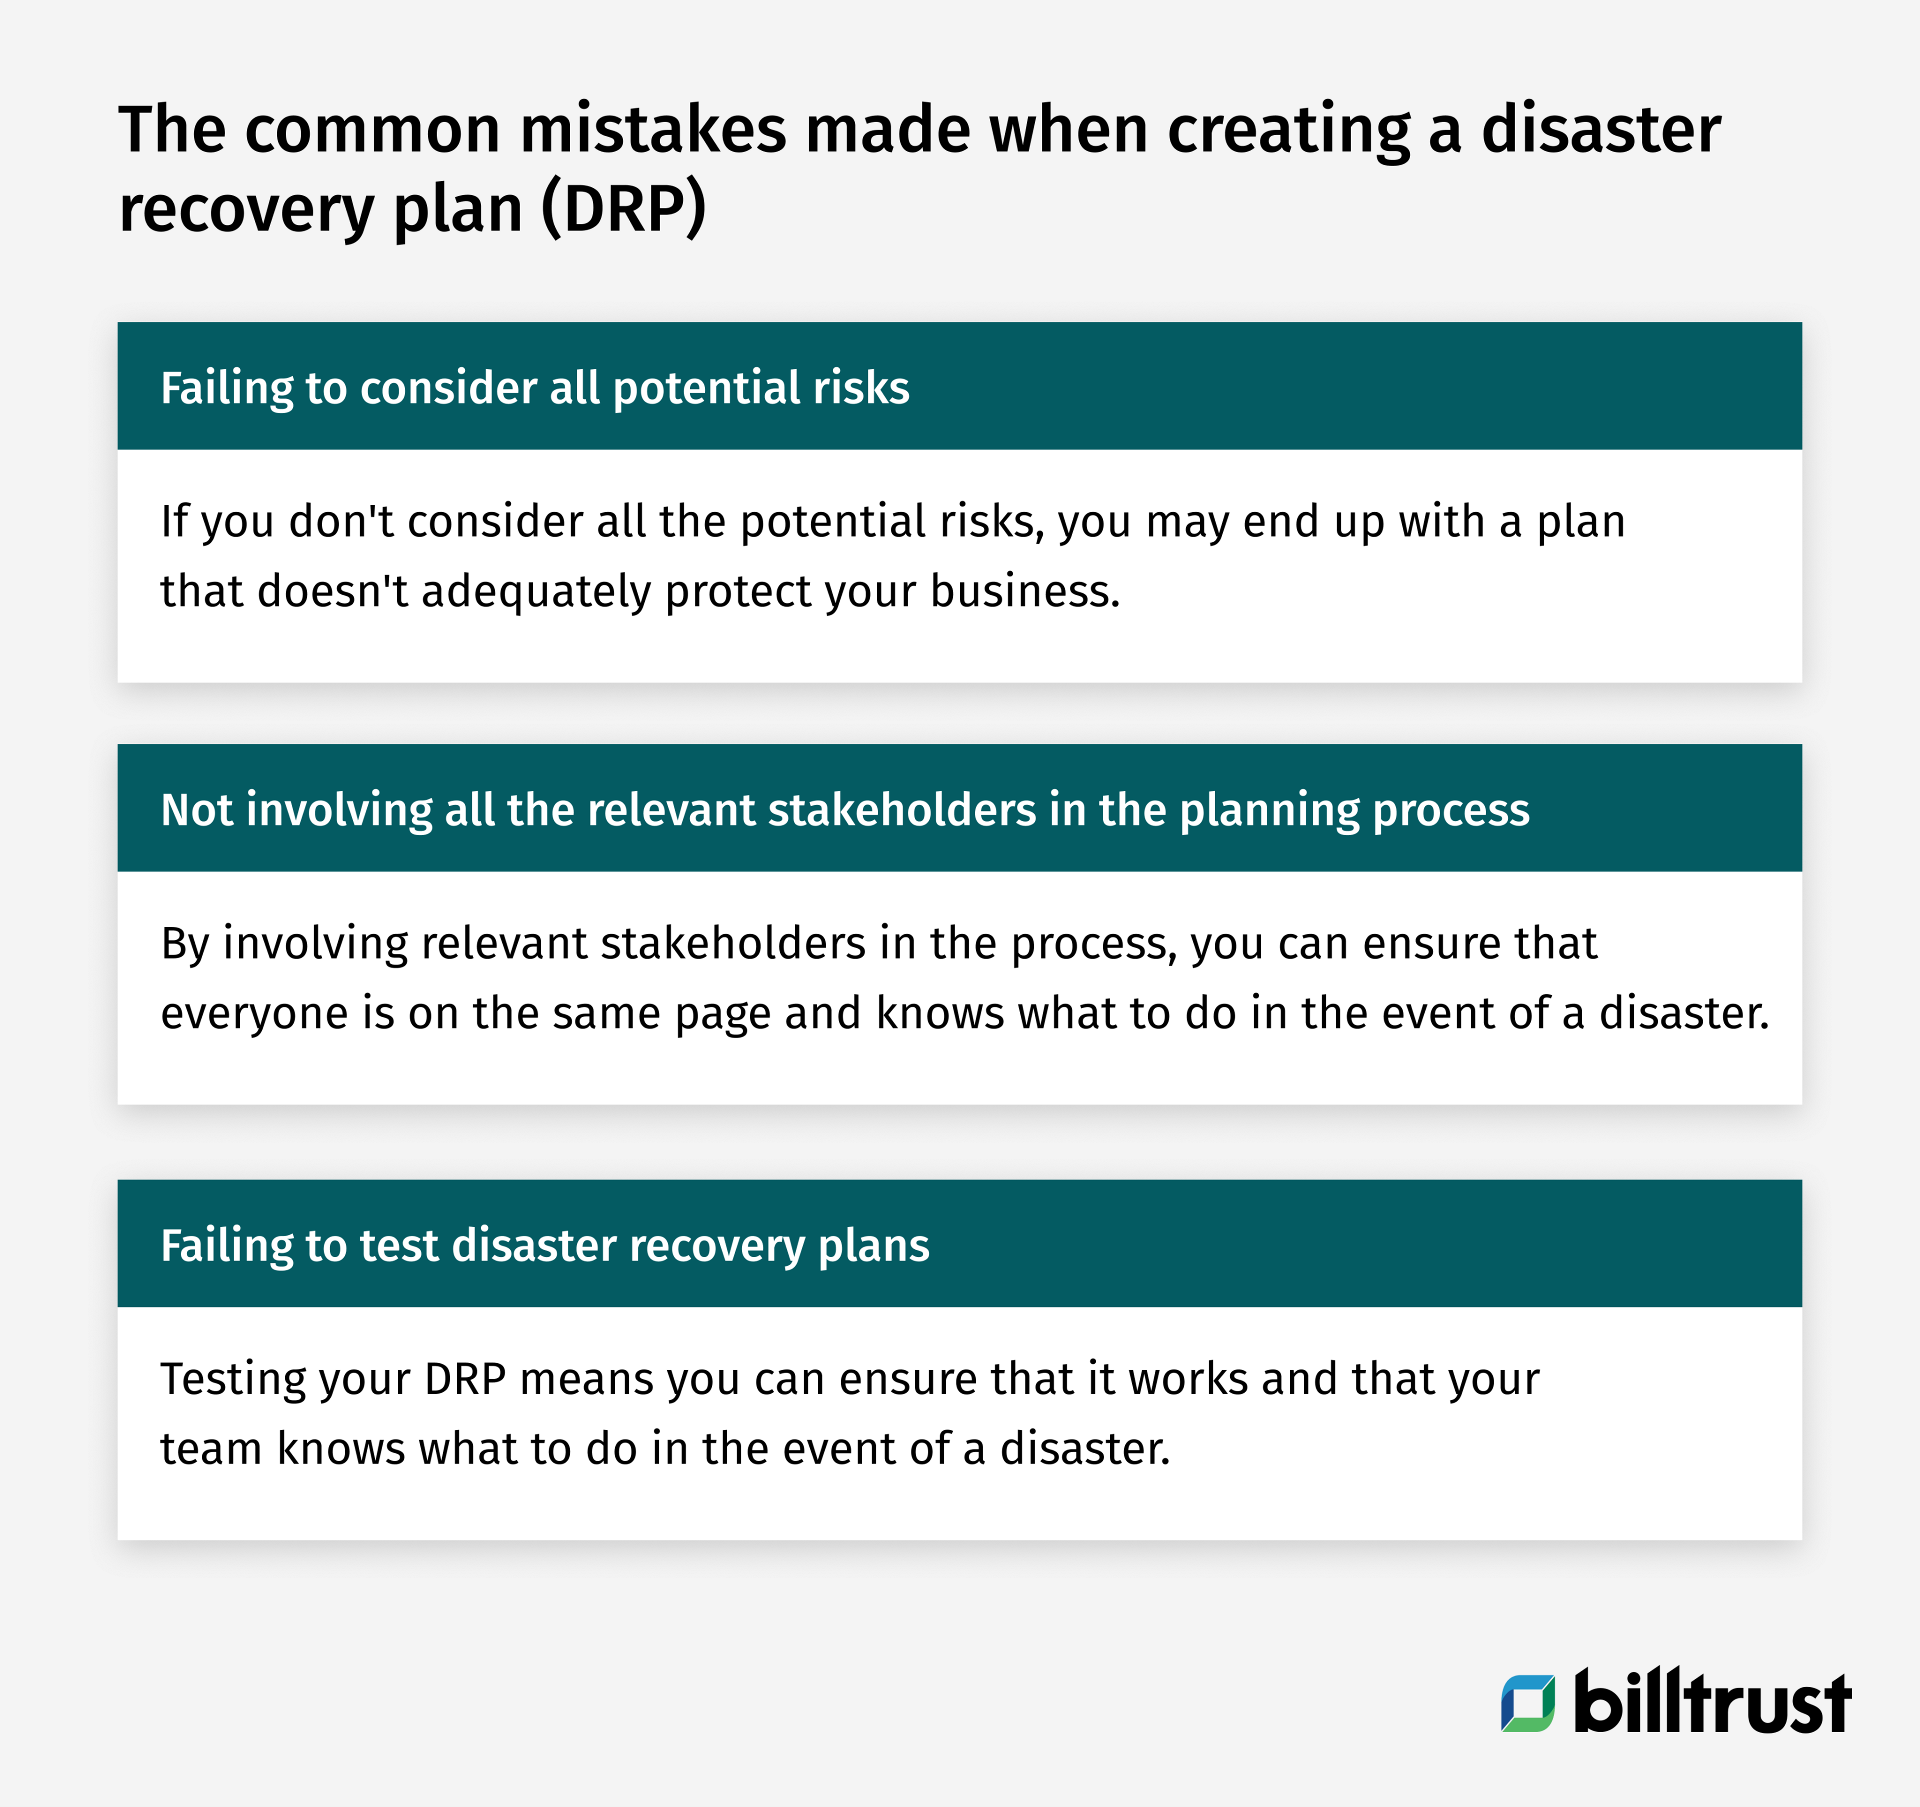 the common mistakes made when creating a disaster recovery plan (DRP)